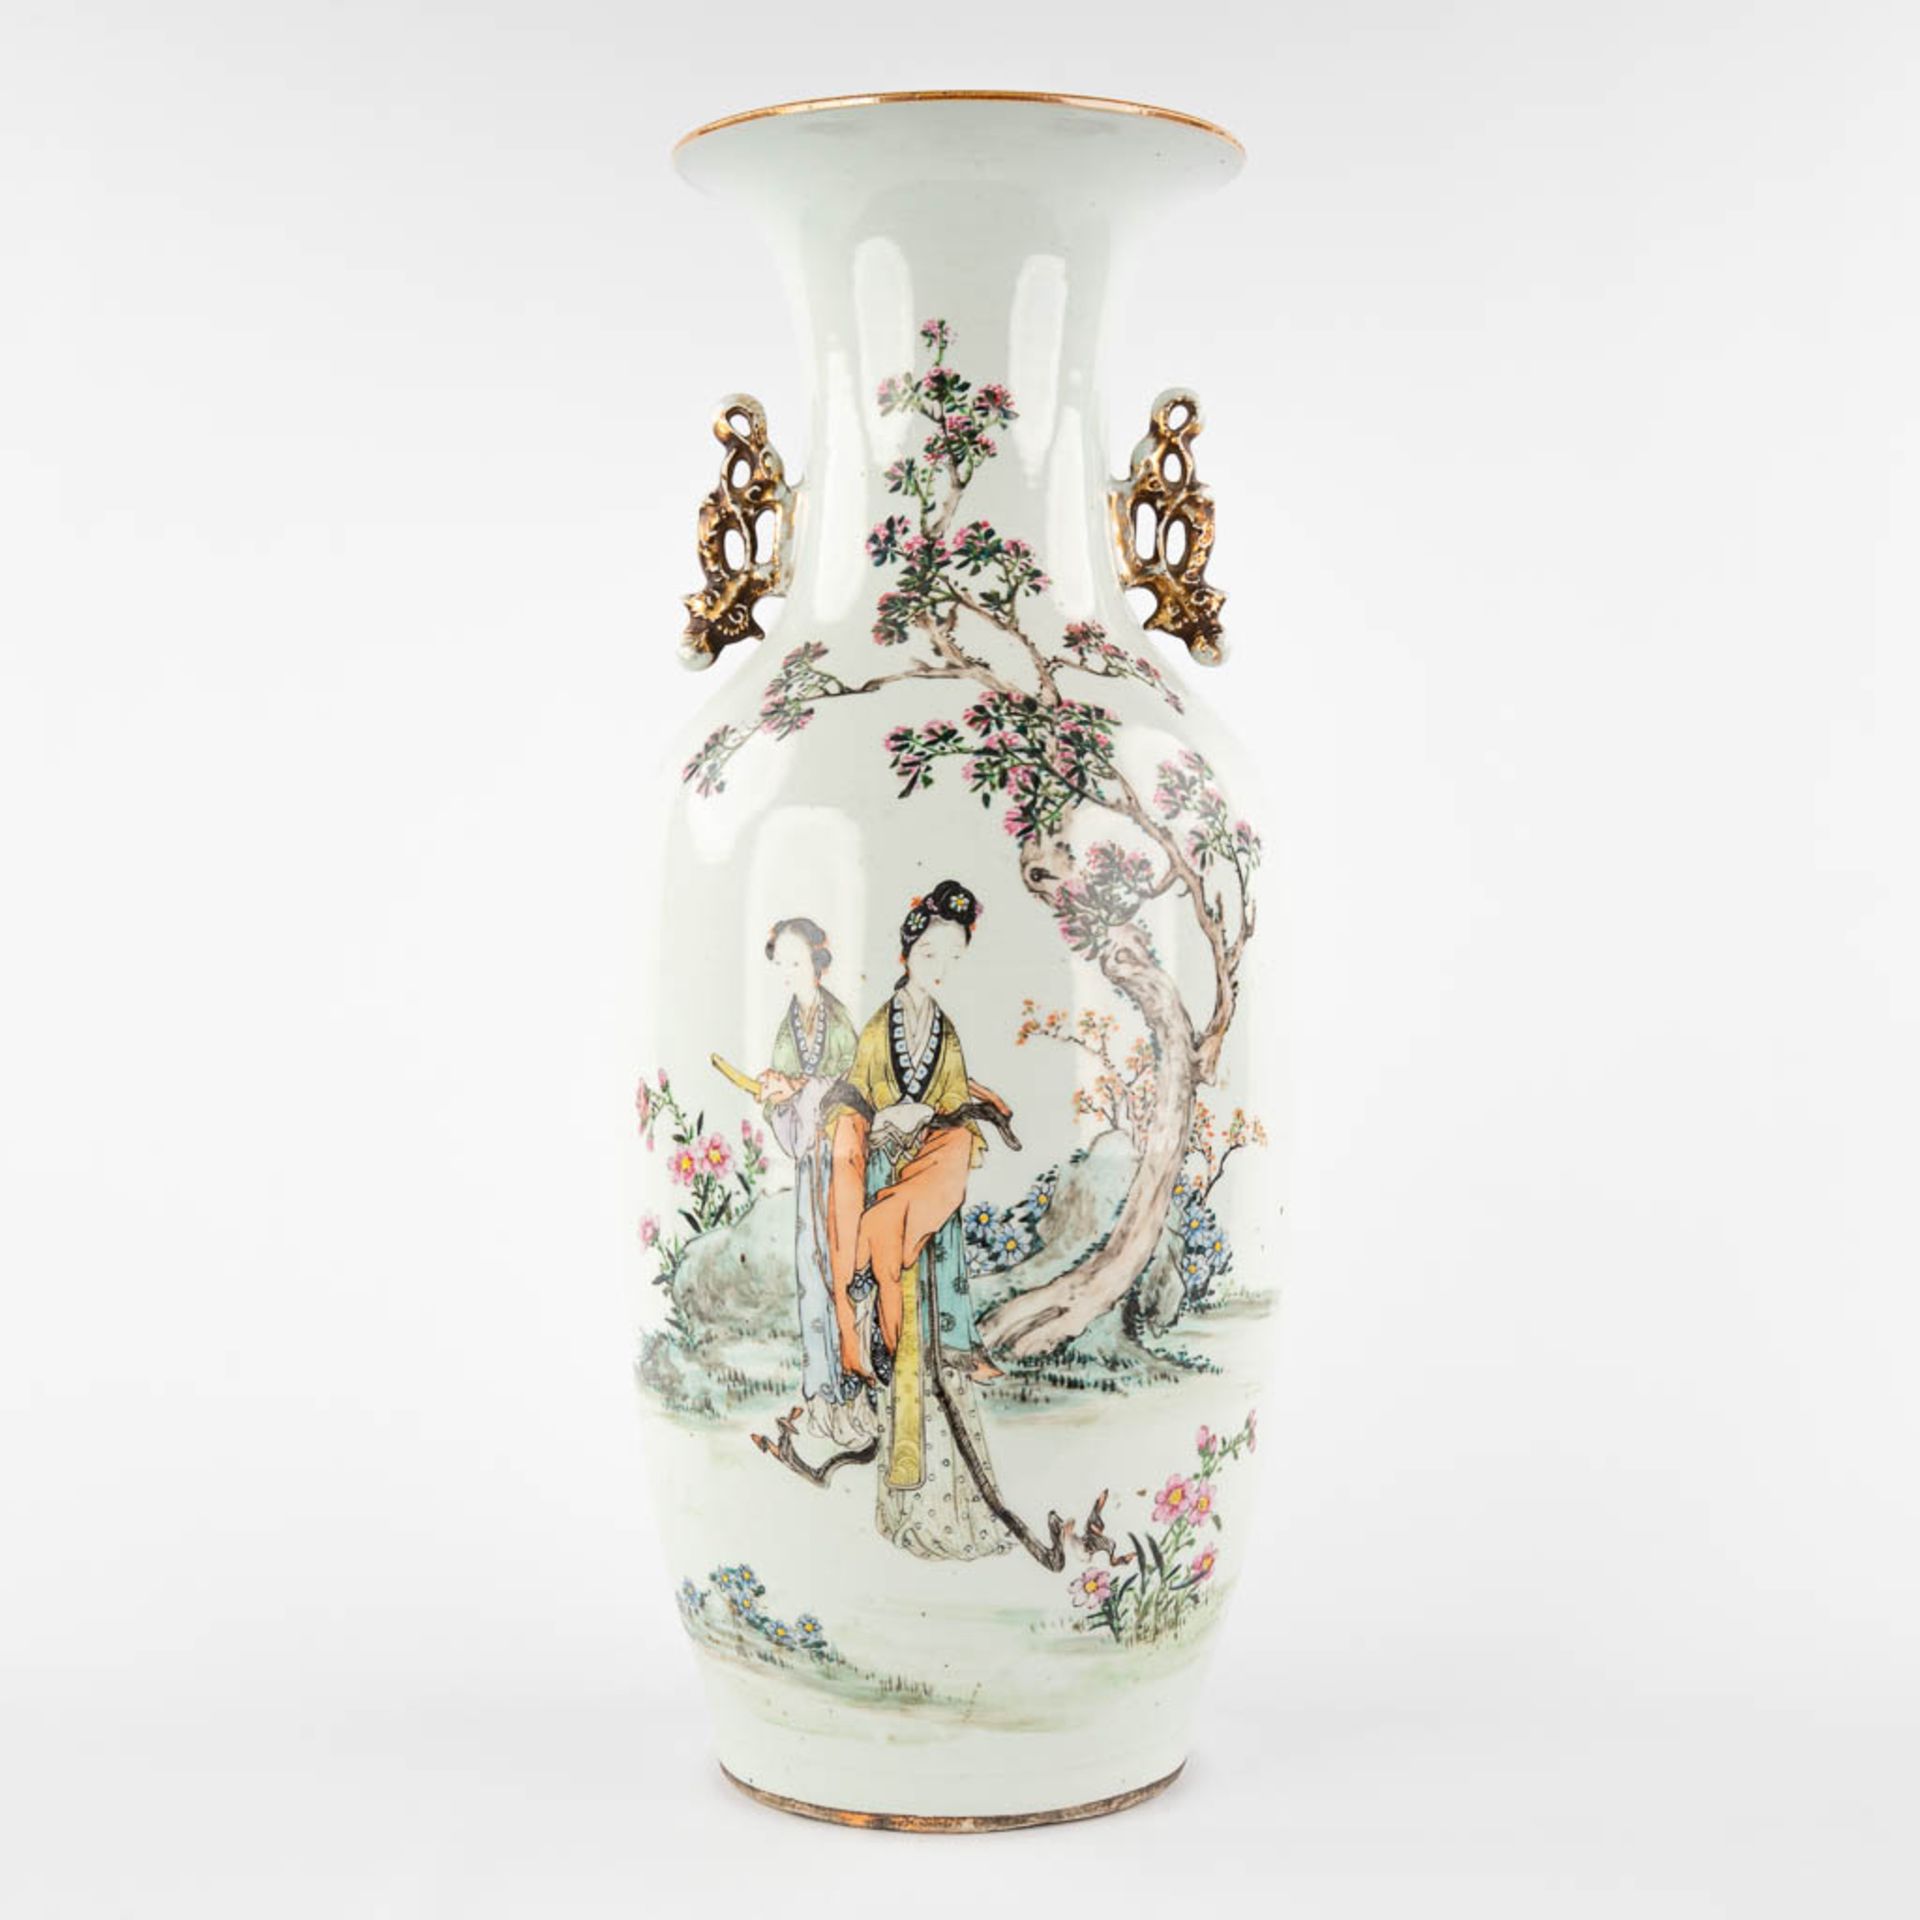 A Chinese vase decorated with ladies and calligraphic texts. 19th/20th C. (H:58 x D:22 cm)